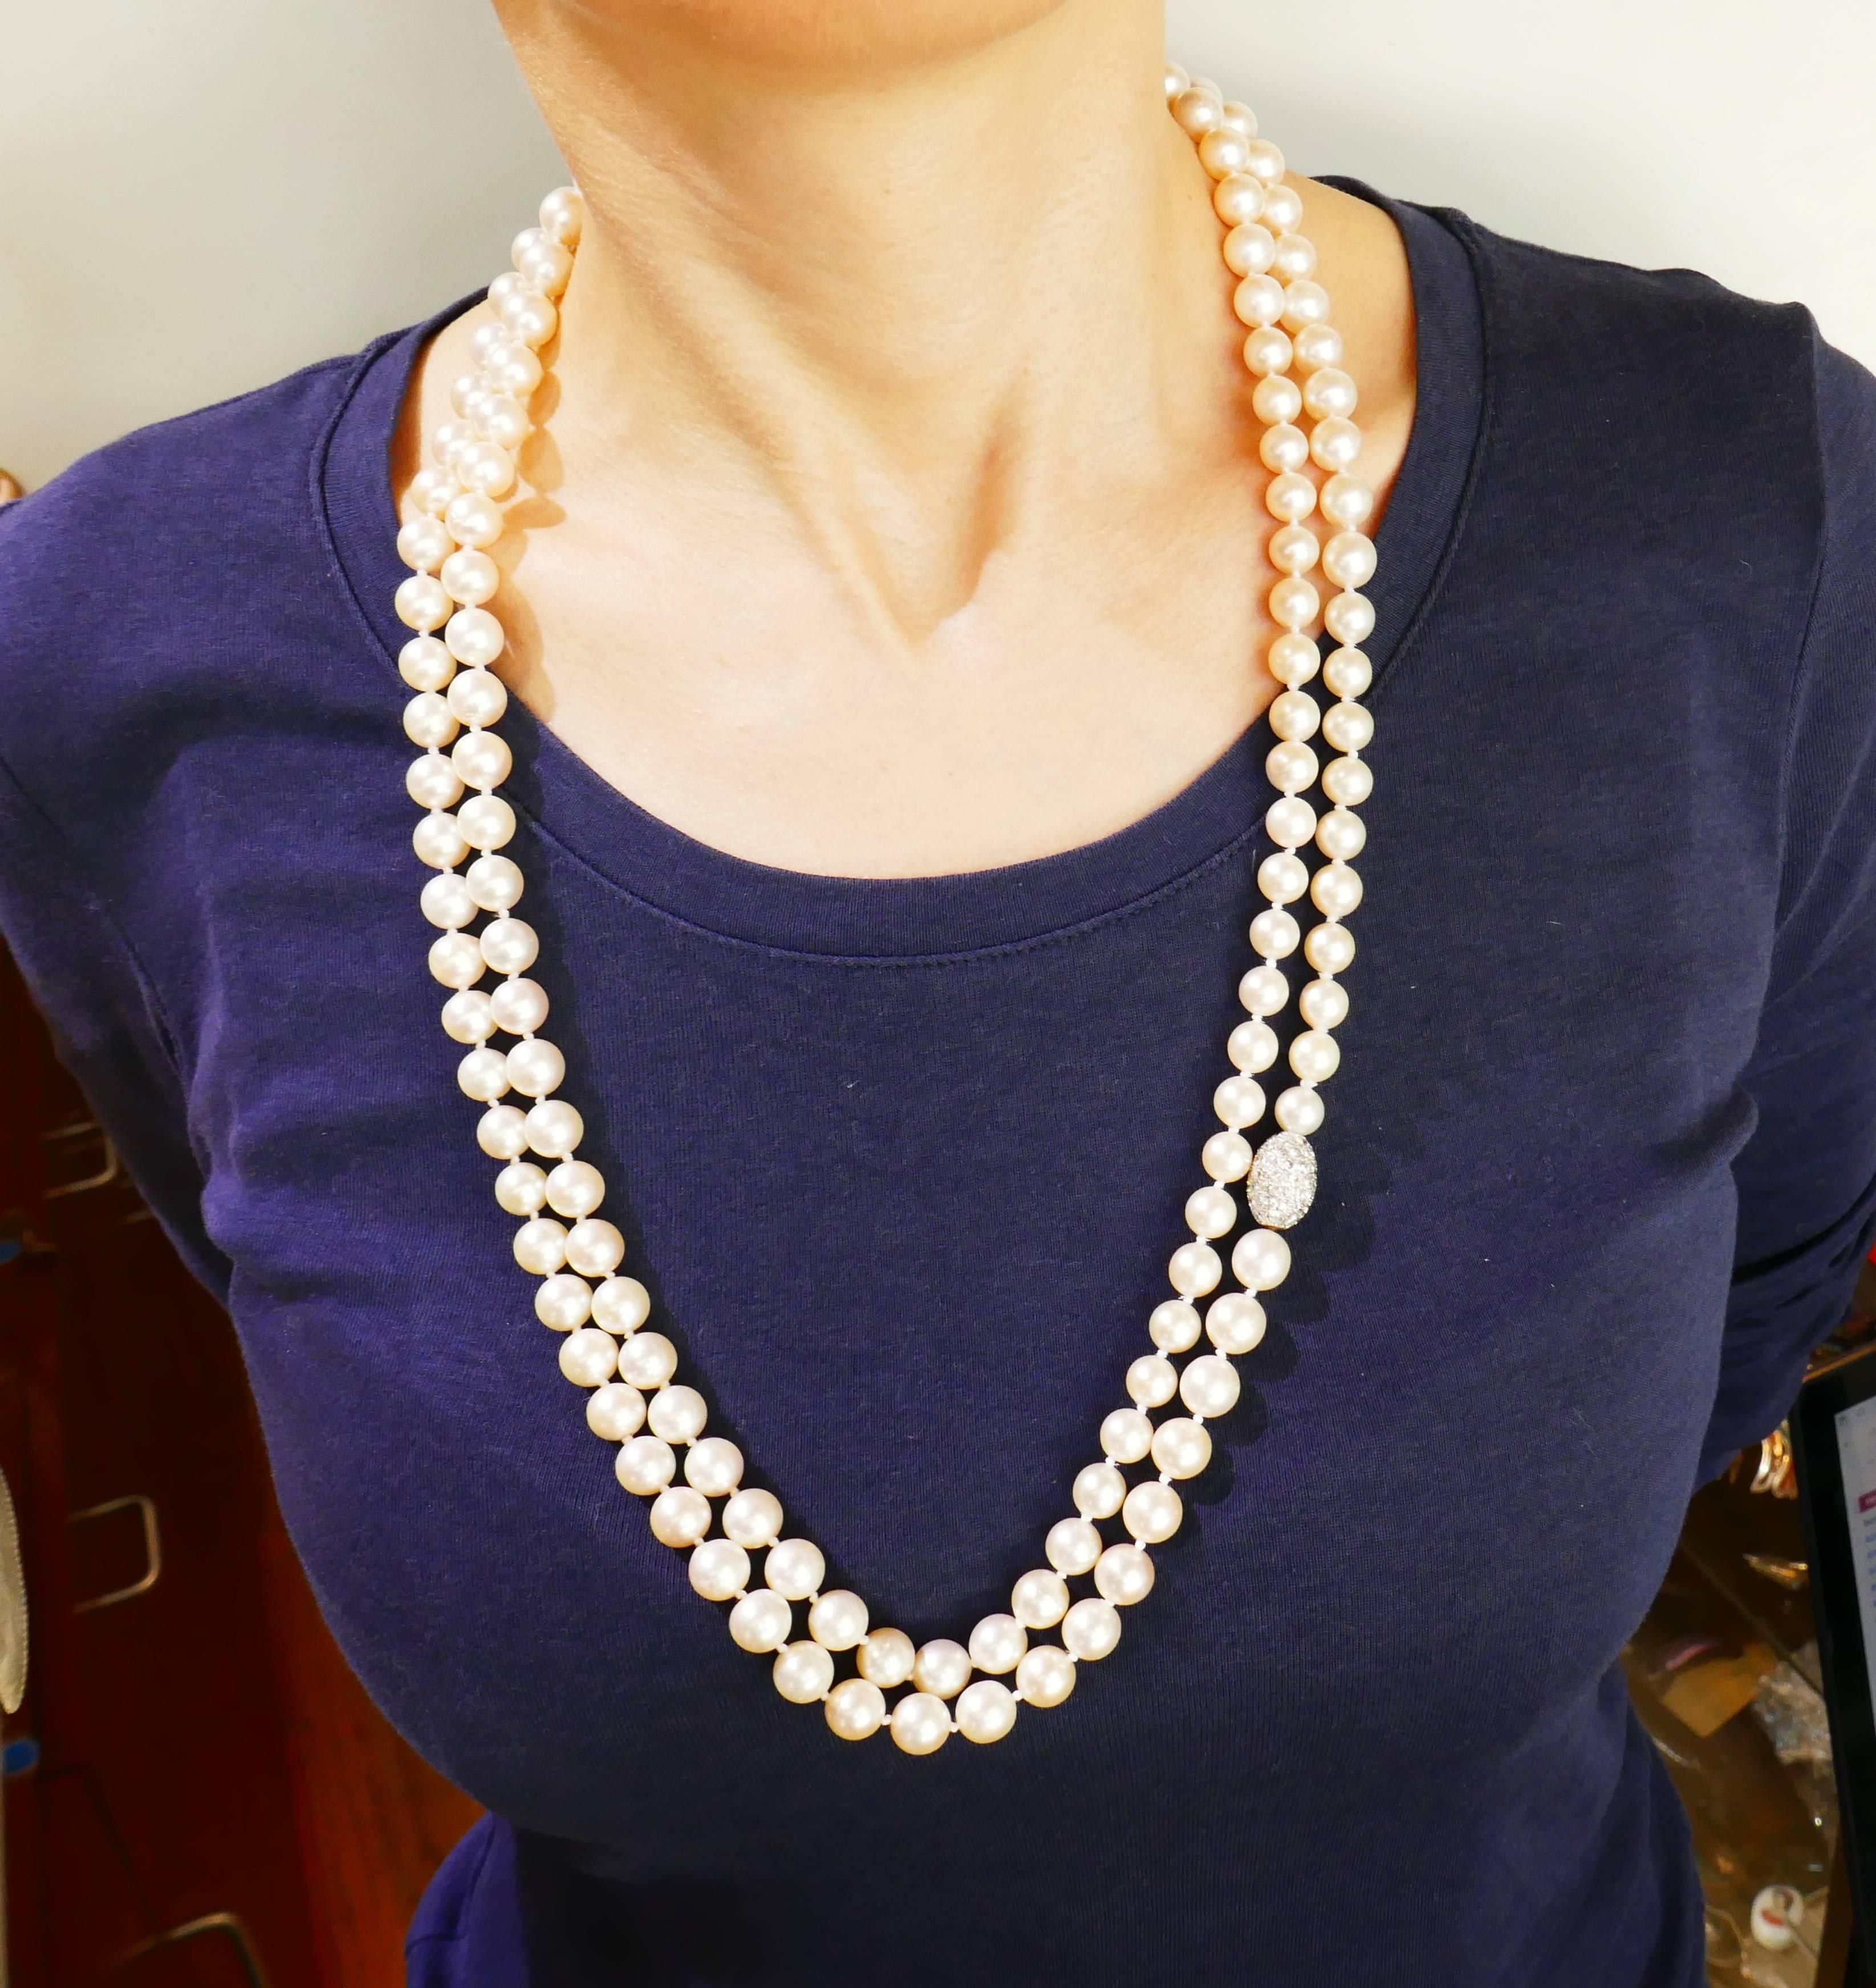 Beautiful, classy and timeless long strand necklace with a diamond clasp. Versatile and wearable, the necklace is a great addition to your jewelry collection. 
The pearls have creamy overtone, measure in average 9.5 mm in diameter, have excellent